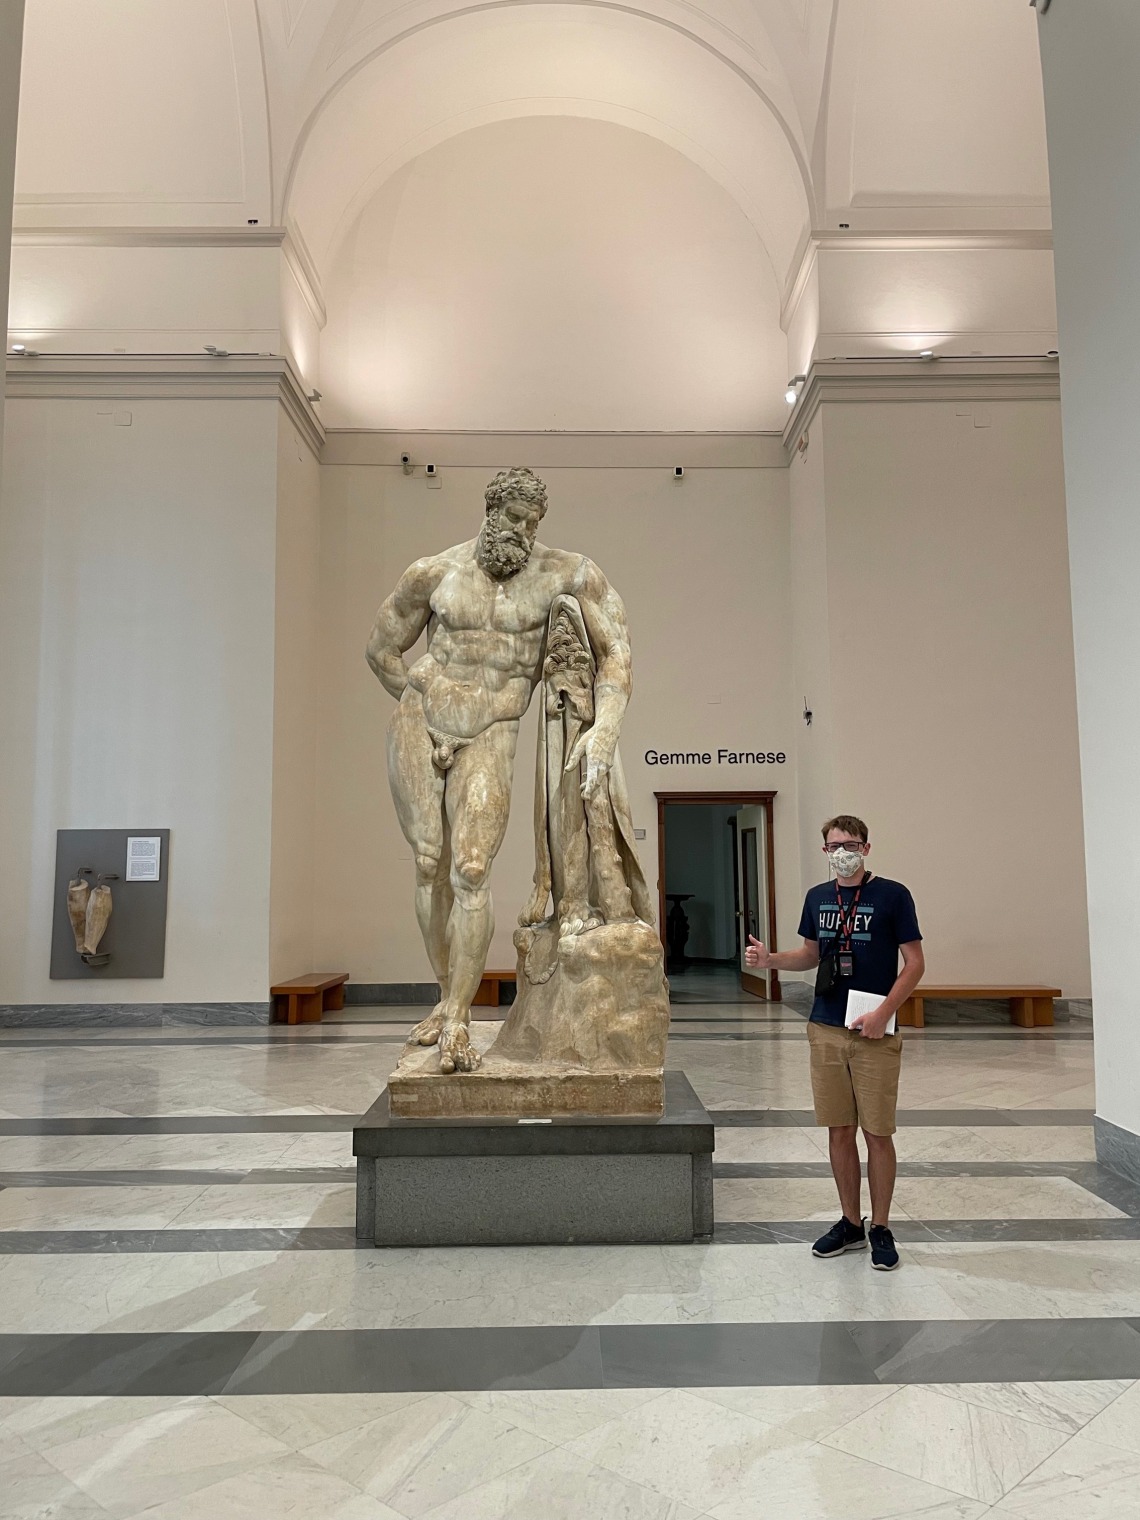 Caleb standing next to a statue